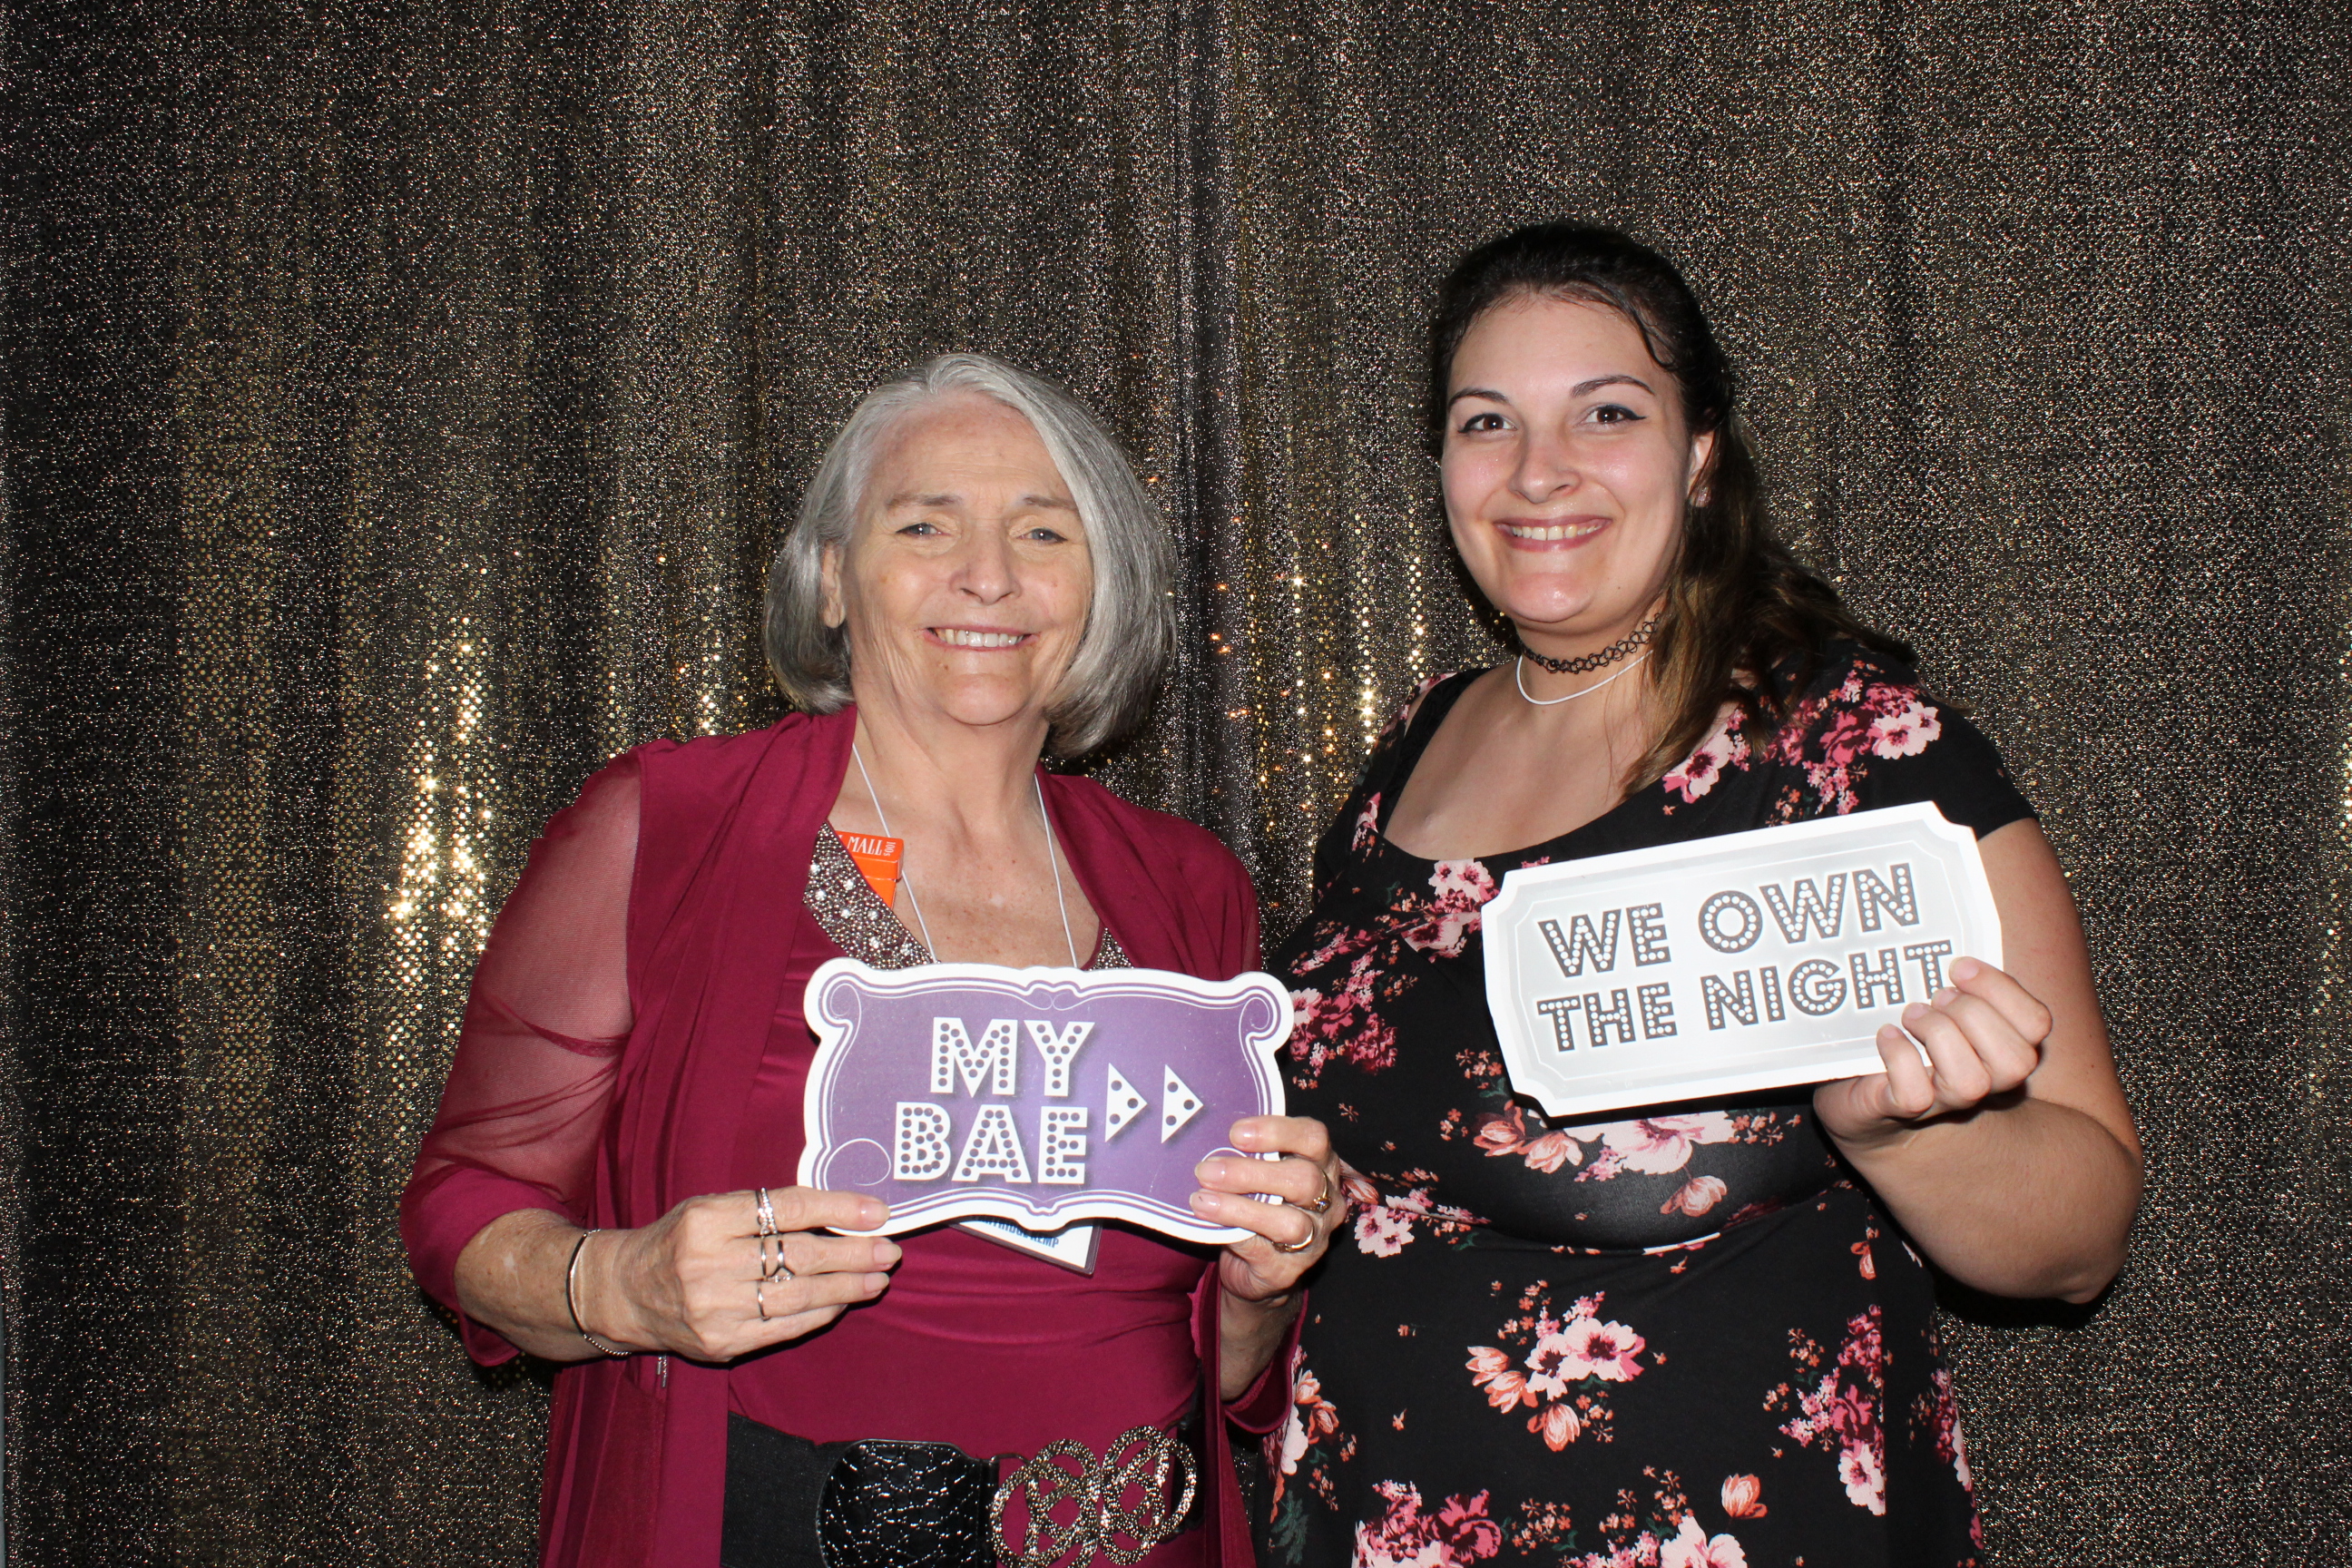 PHOTO BOOTH: Barb Partridge and Ashley Kemp